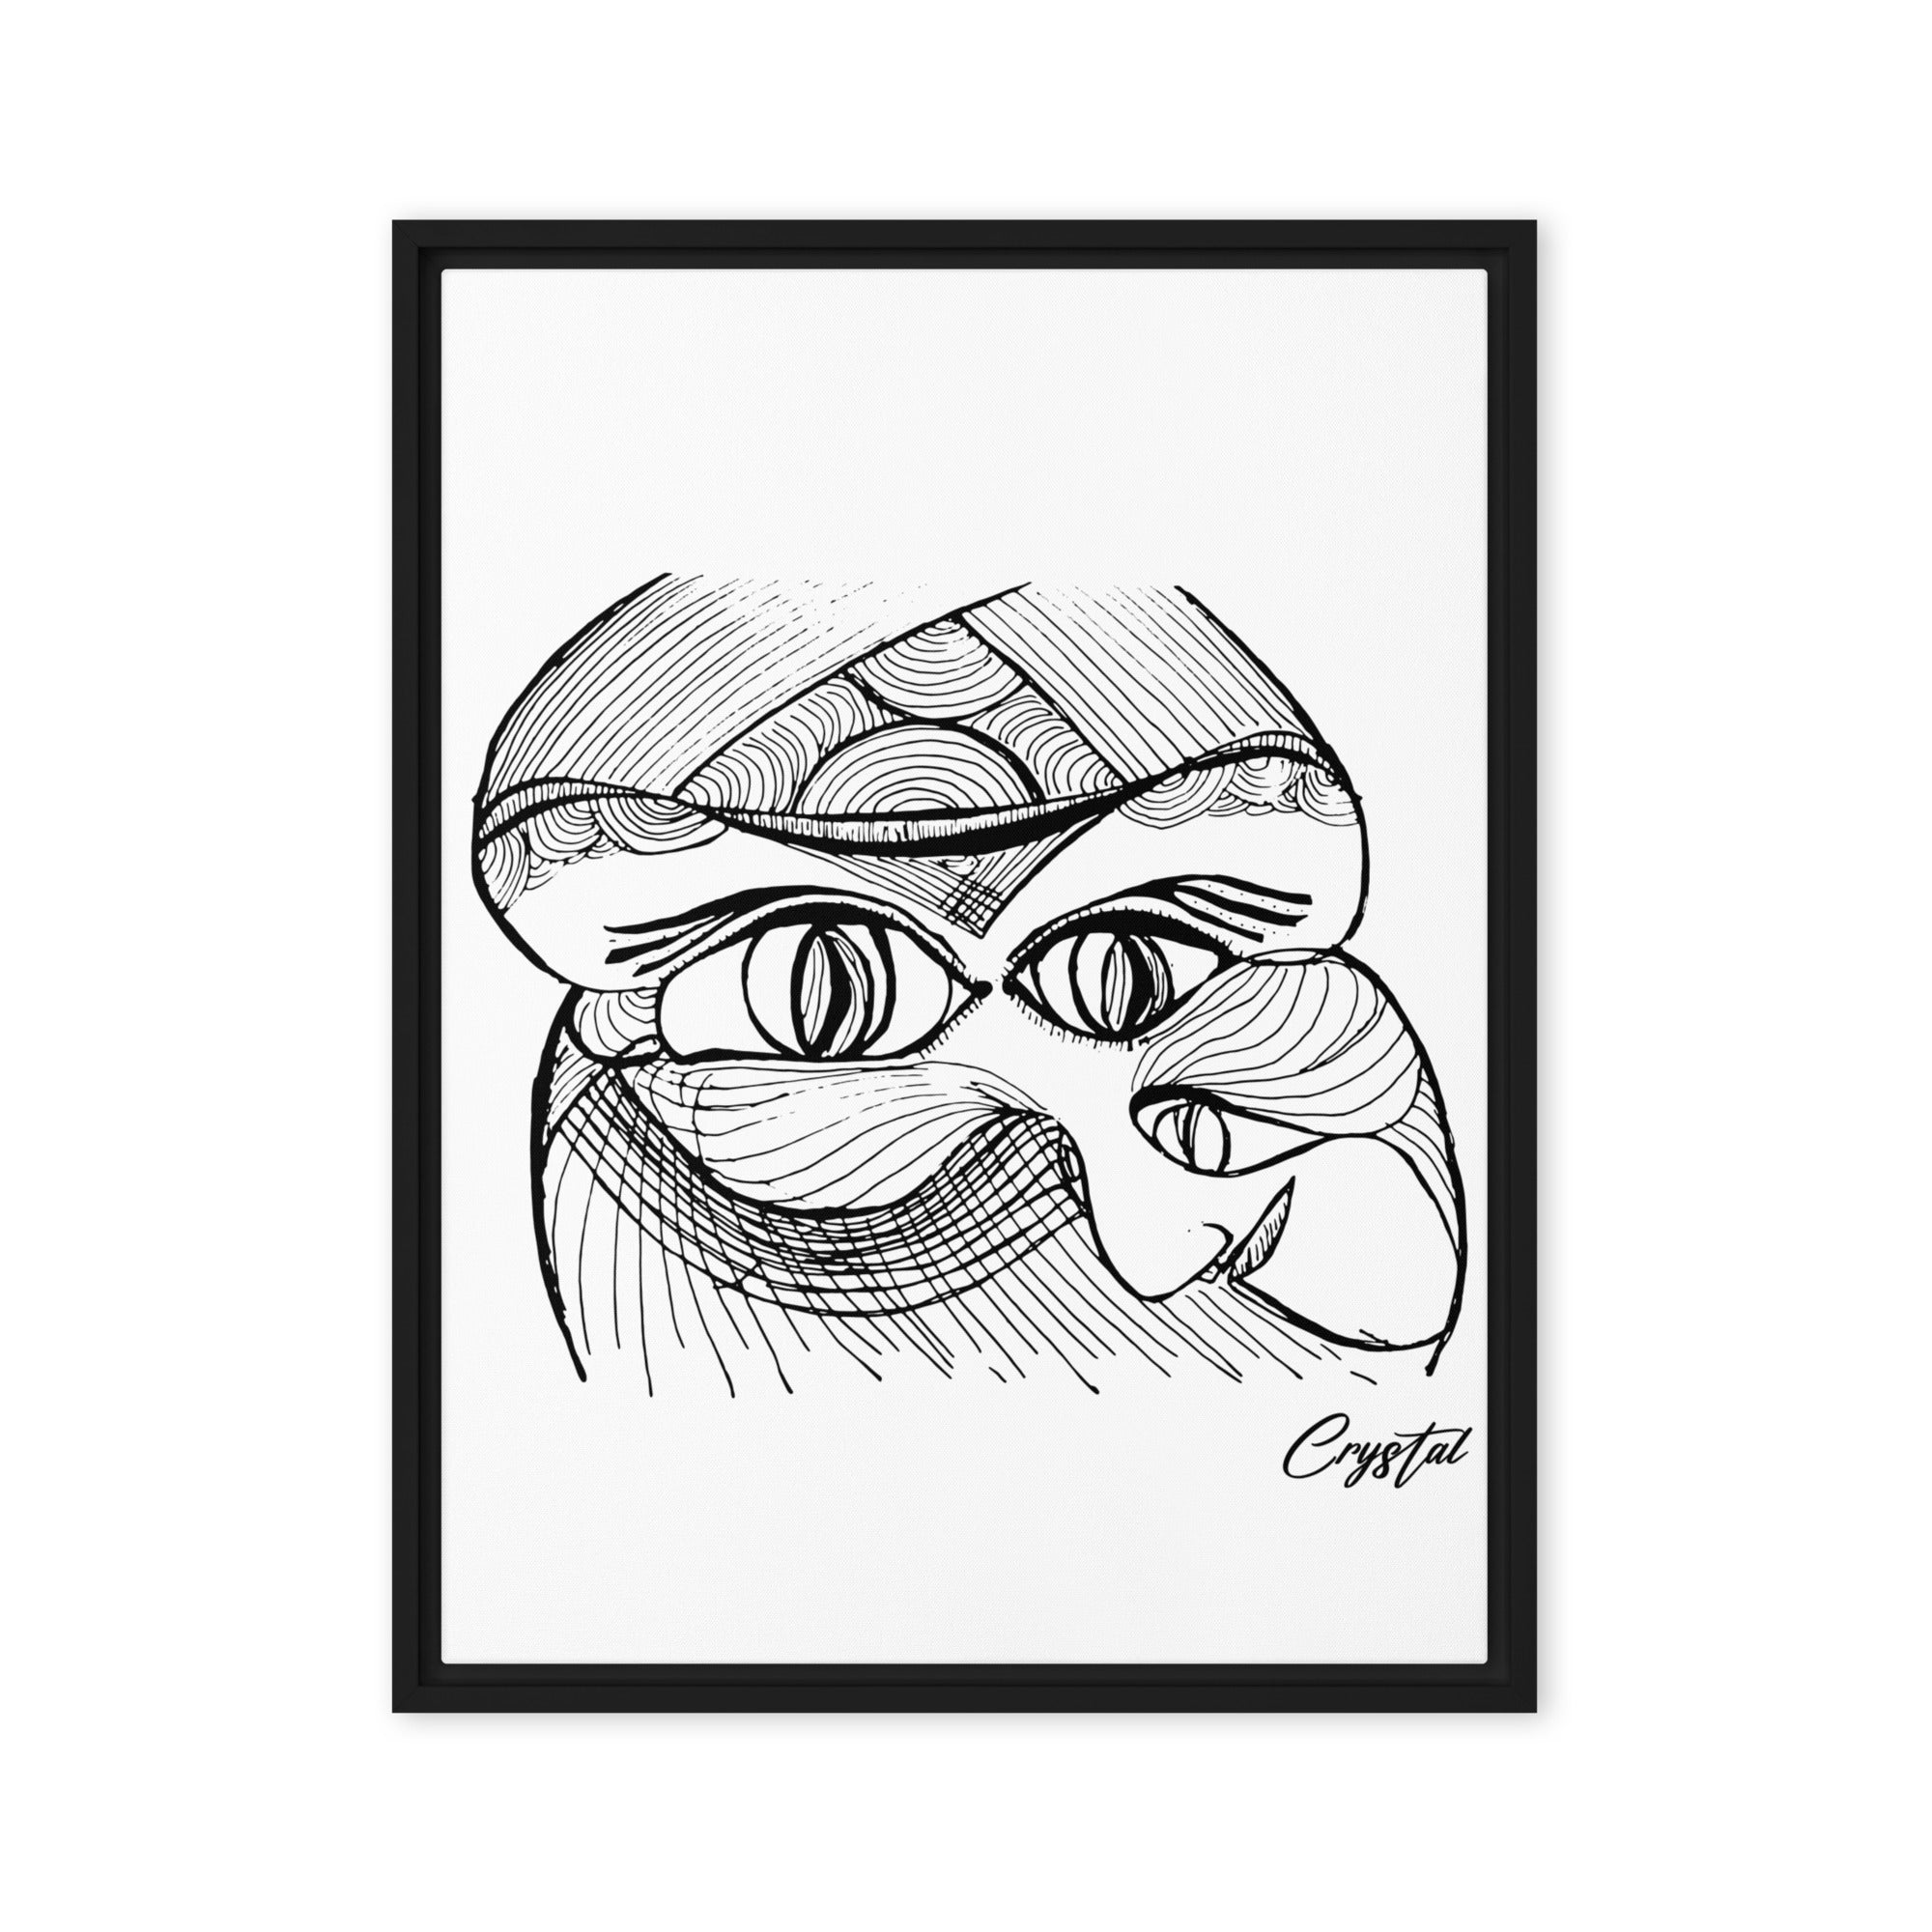 Genderless Face with Ornate Pattern and Four Eyes - Cute & Creepy "Stay Weird" Cartoon Illustration Framed canvas